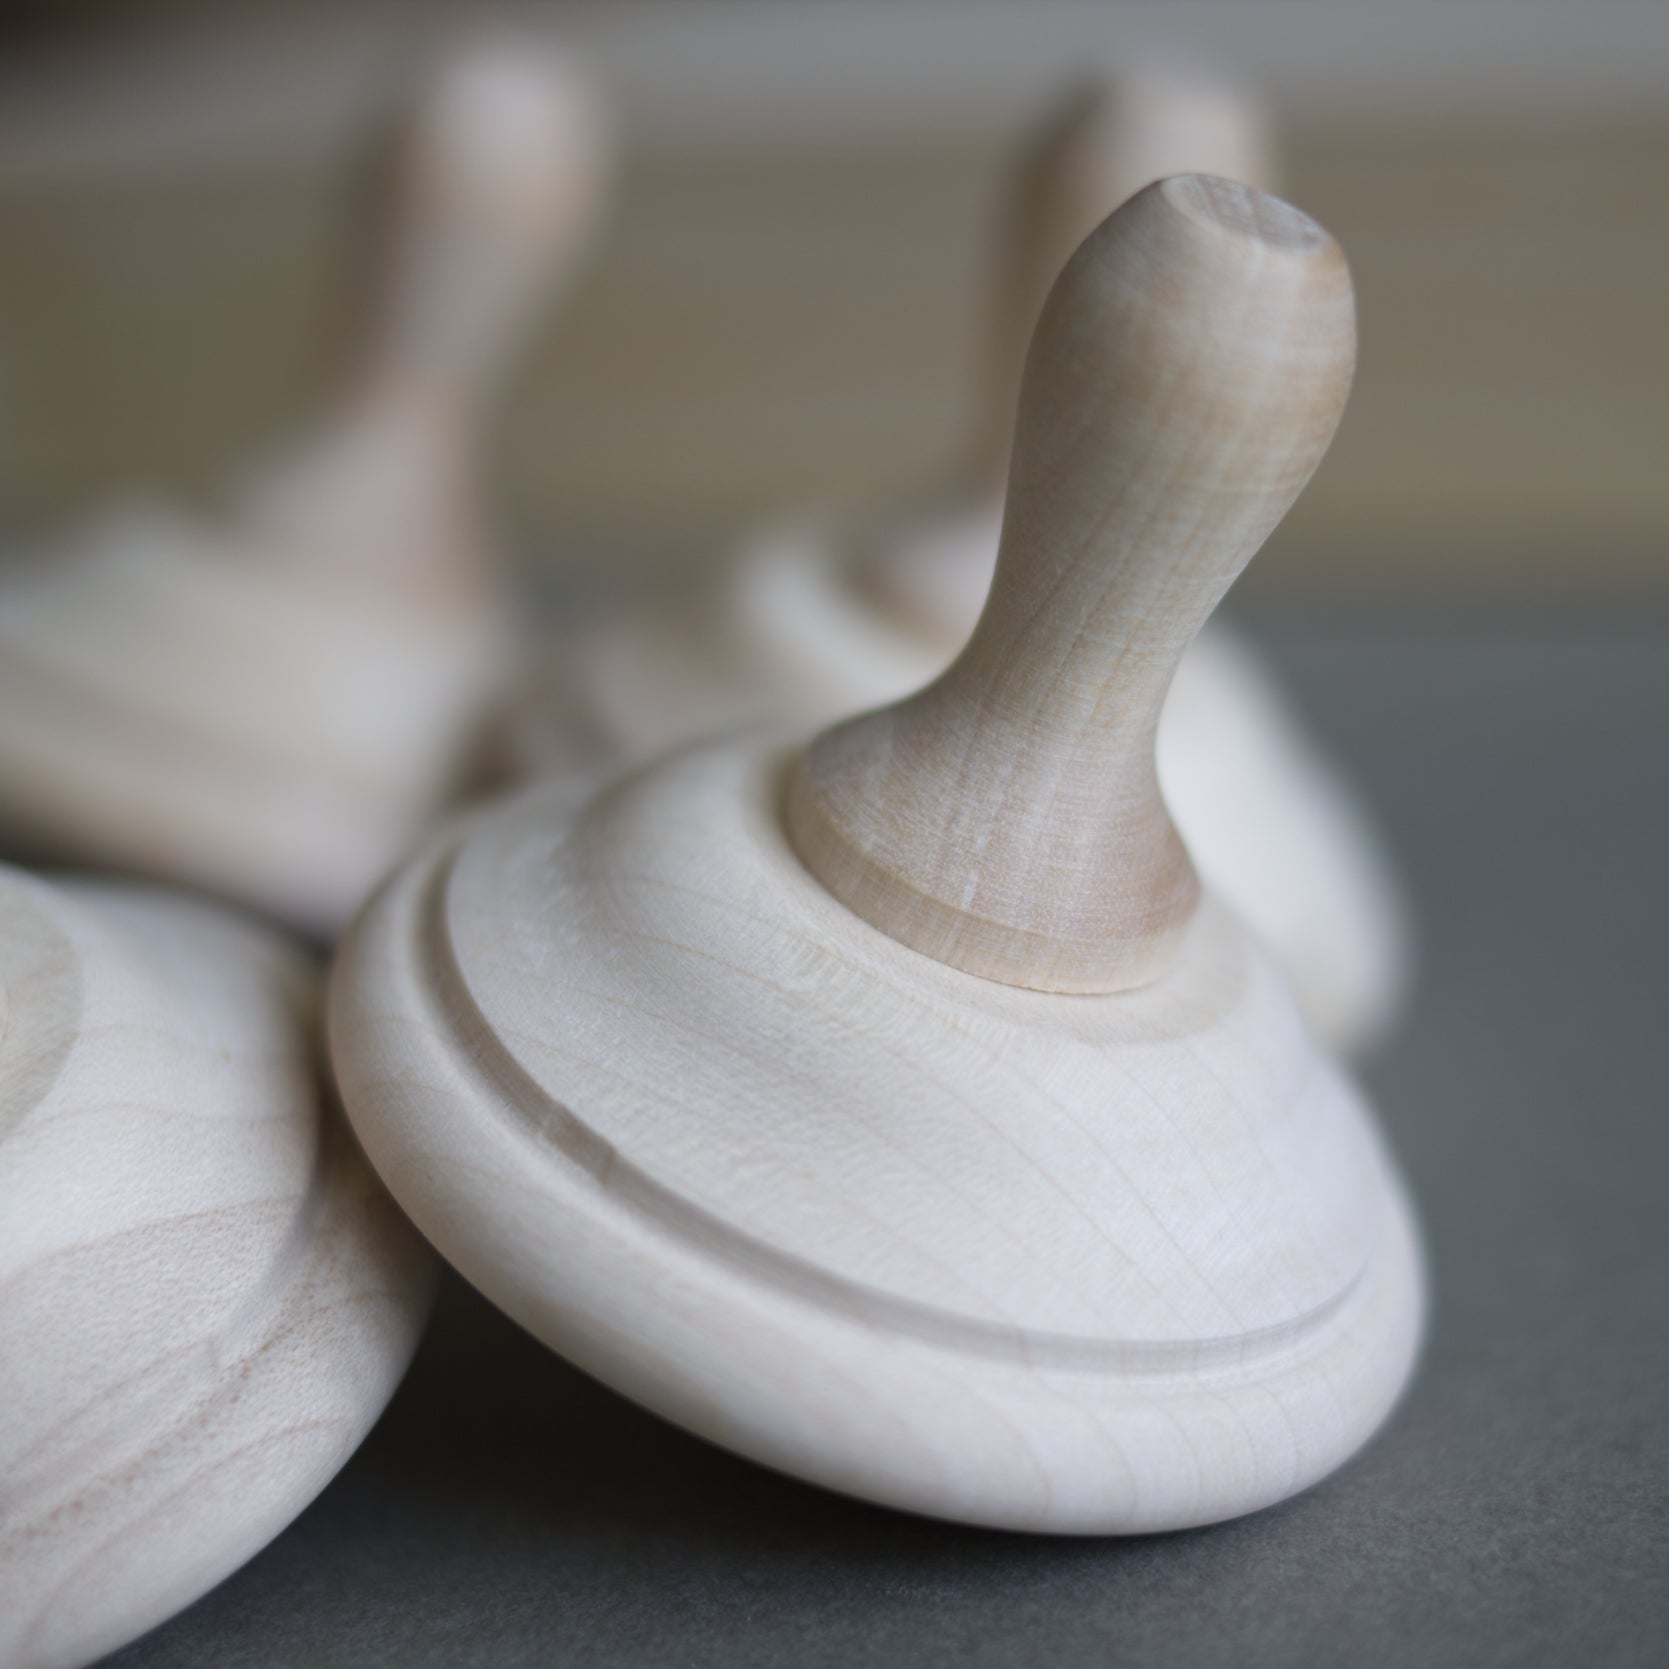 Wooden Spinning Top